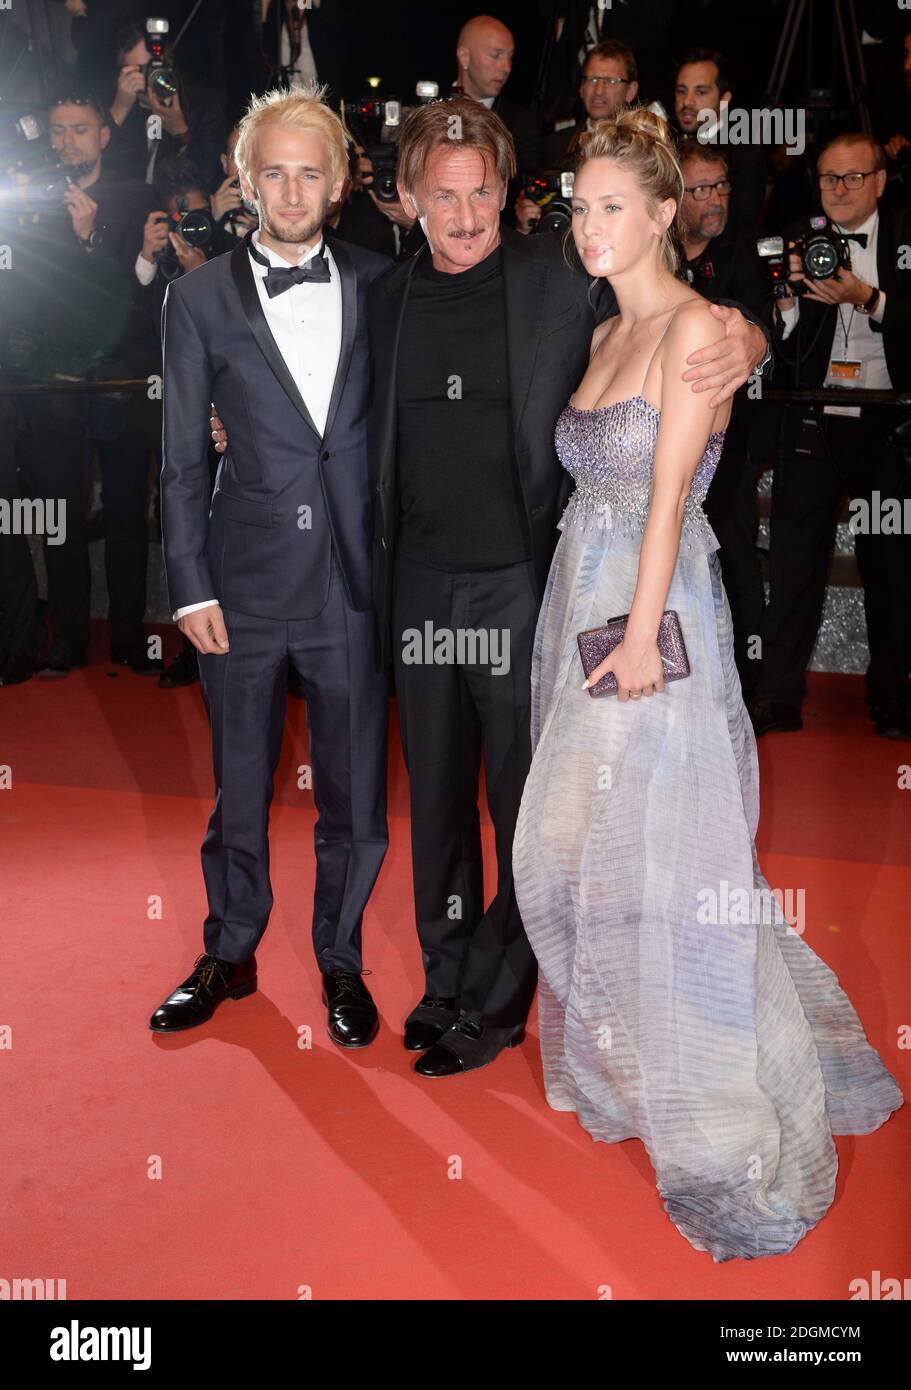 Hopper Penn, Sean Penn and Dylan Penn attending The Last Face premiere, held at the Palais De Festival, Cannes. Part of the 69th Cannes Film Festival in France. (Mandatory credit: Doug Peters/EMPICS Entertainment)   Stock Photo